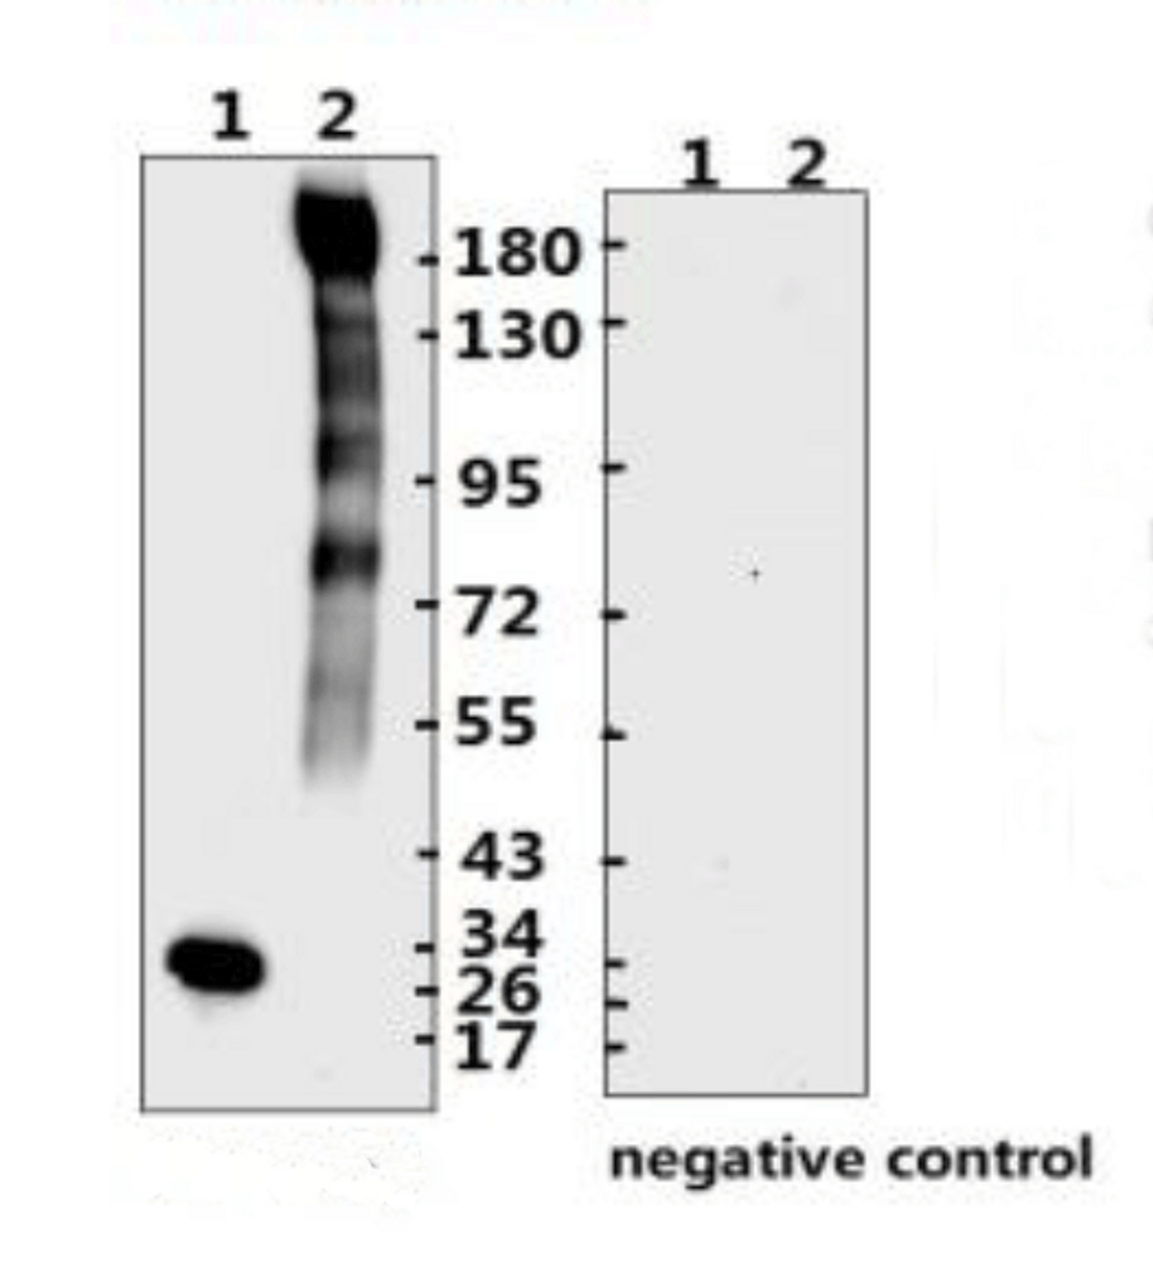 <strong>Figure 1 Western Blot Validation with Recombinant Protein</strong><br>Loading: 1ug of recombinant protein per lane. Lane 1: 10-007, Lane 2: 10-008 and Lane 3: 10-011. Antibodies: SARS-CoV-2 (COVID-19) Spike RBD, 10-529, 1:500. Secondary: Goat anti-rabbit IgG HRP conjugate at 1:20000 dilution.